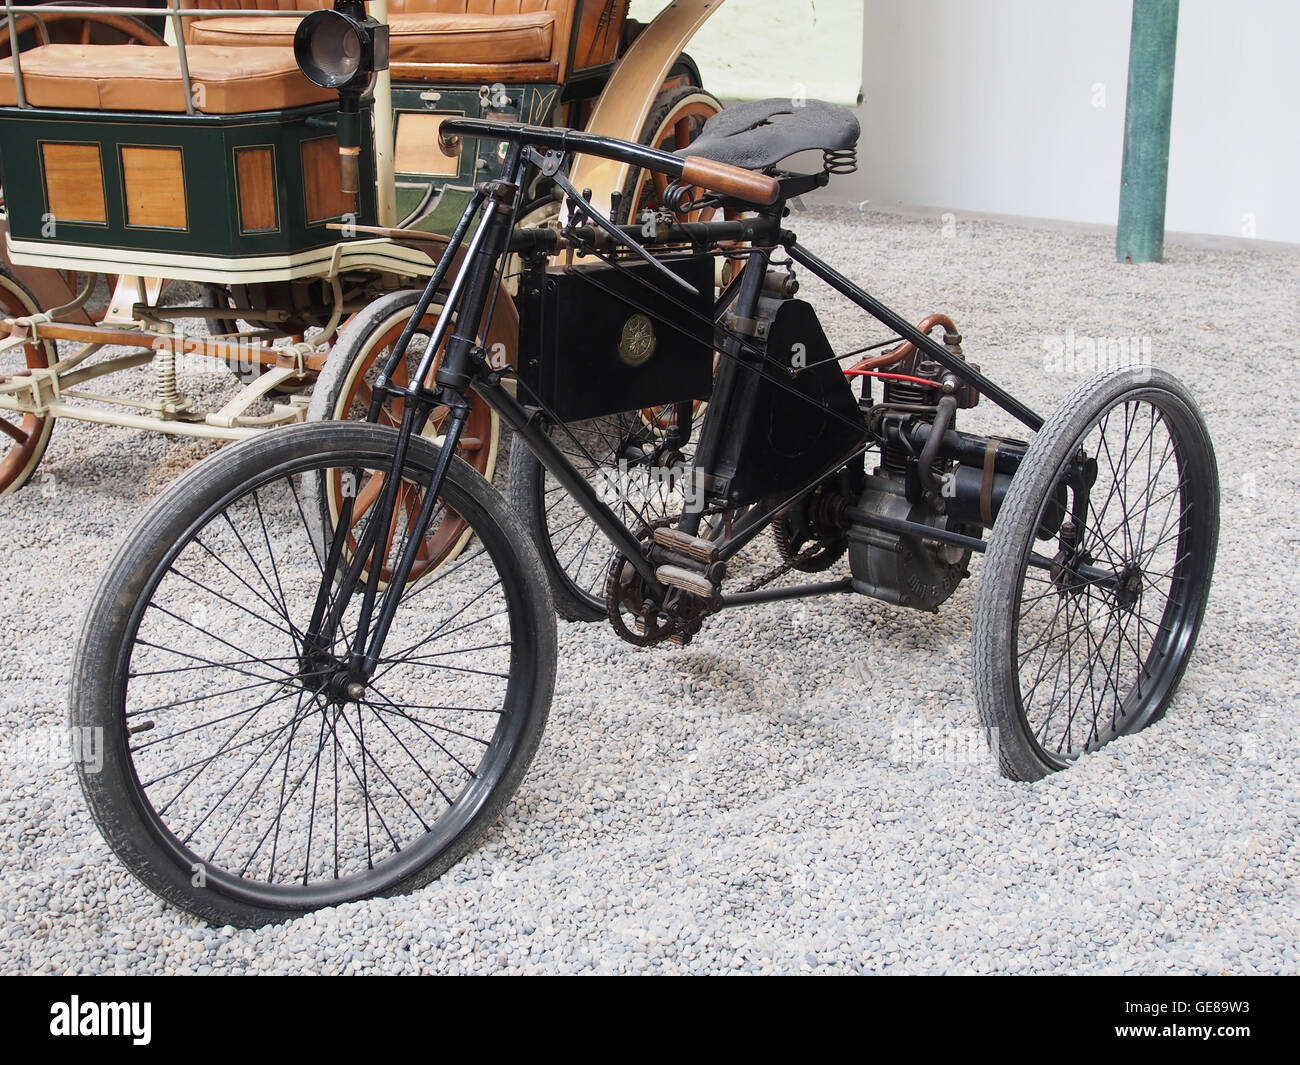 1897 De Dion-Bouton tricycle photo 2 Stock Photo - Alamy